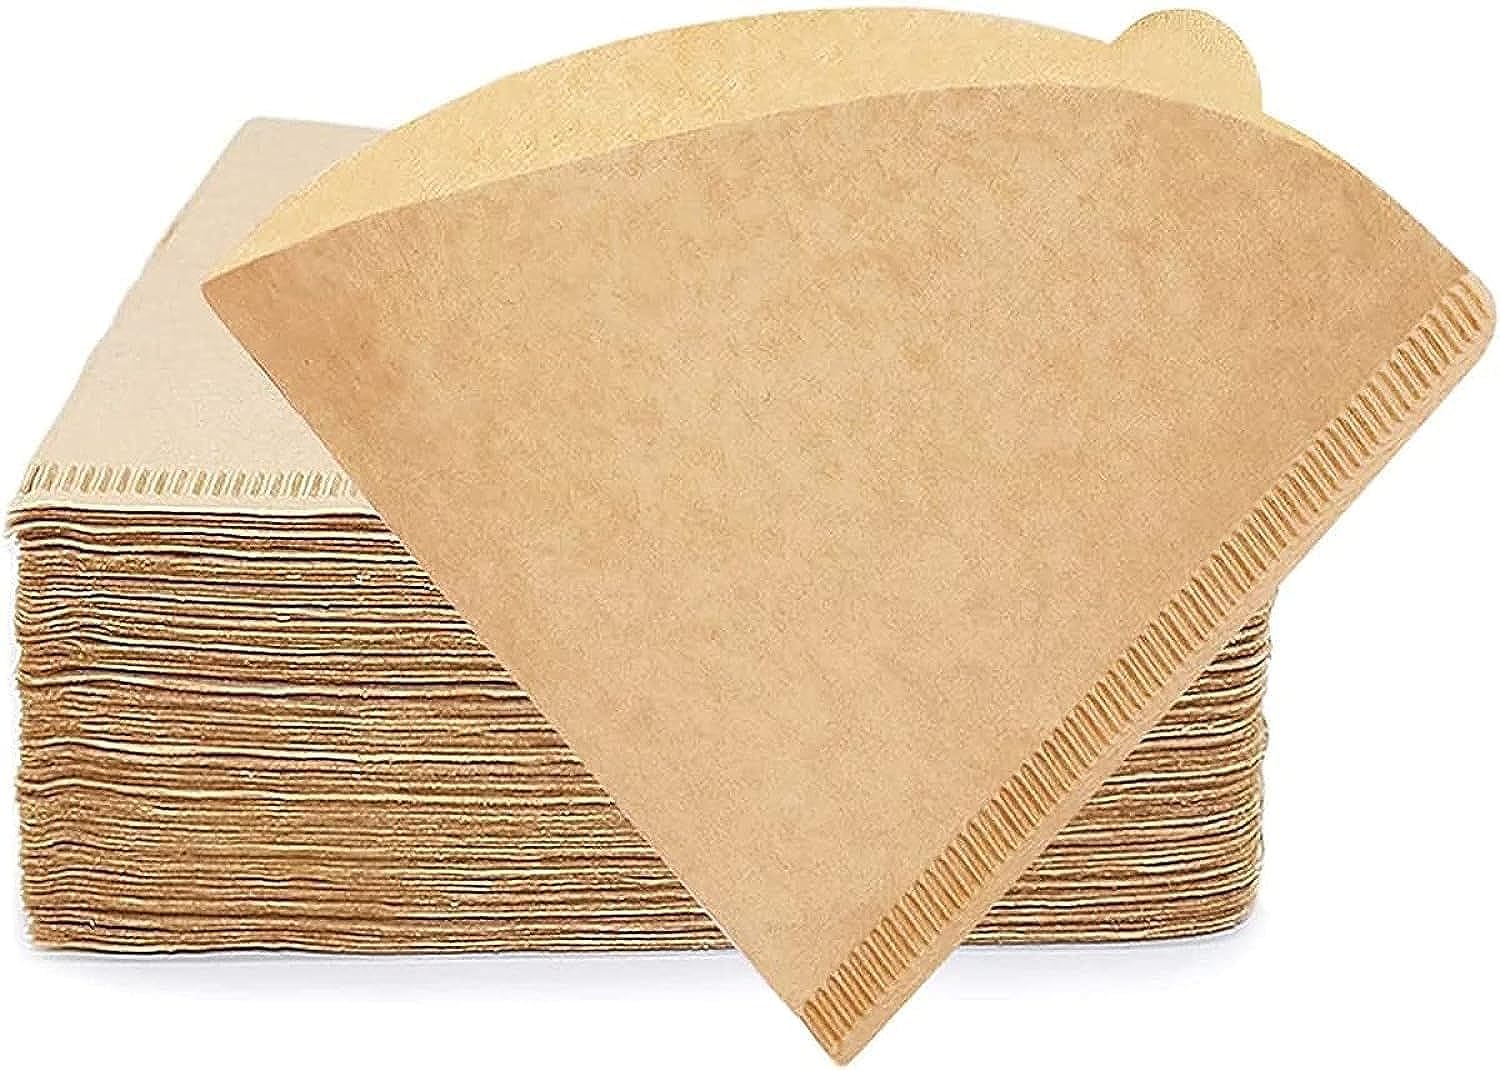 SKY-TOUCH Coffee Filter 100 pcs, Coffee Filter Paper V60 Unbleached Disposable Coffee Filters Paper for Pour Over and Drip Coffee Maker (2-4 Cups)